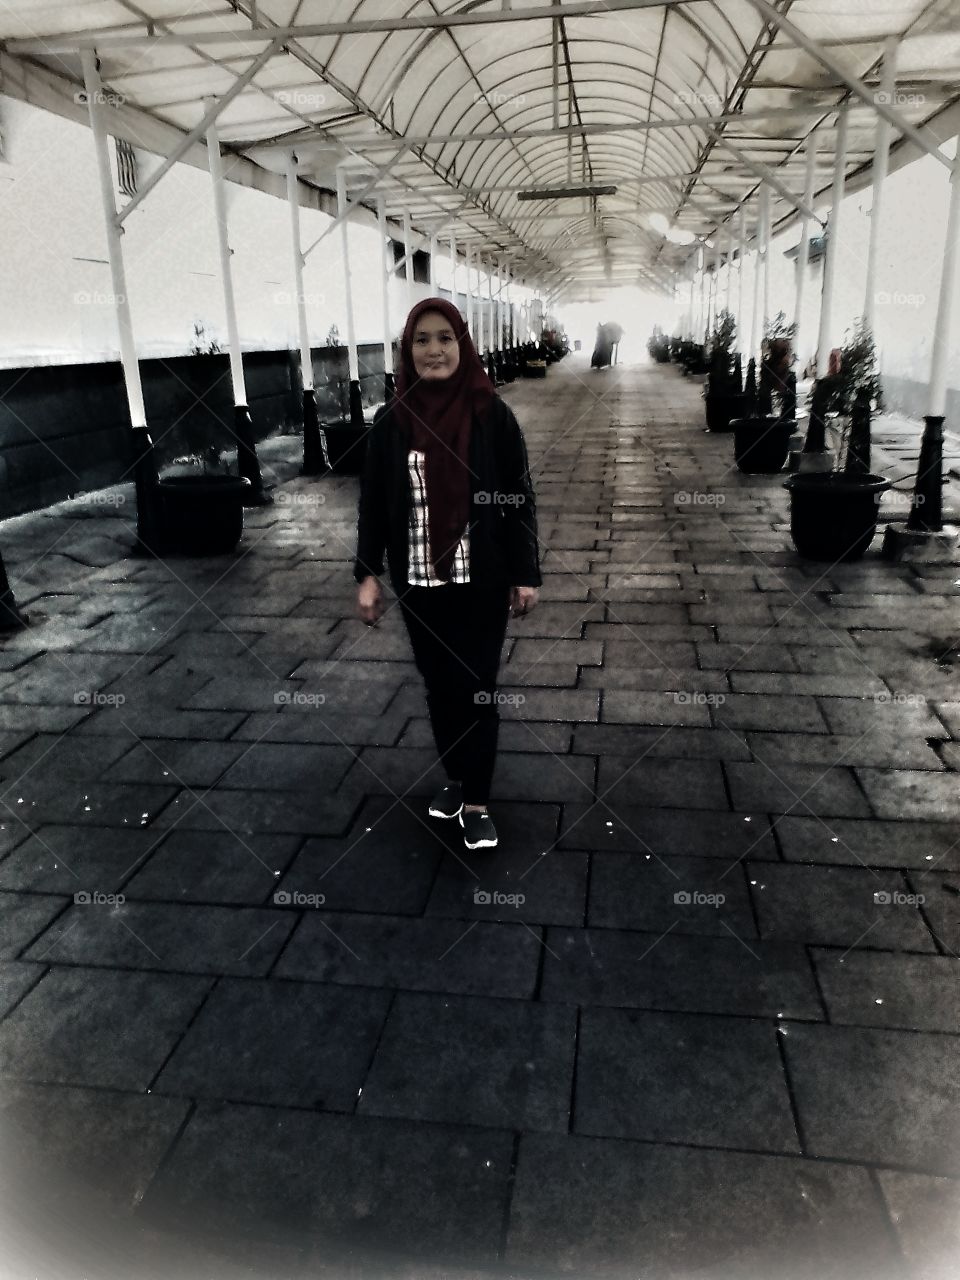 Someone is walking in the aisles in Kota Tua city of Jakarta, Indonesia